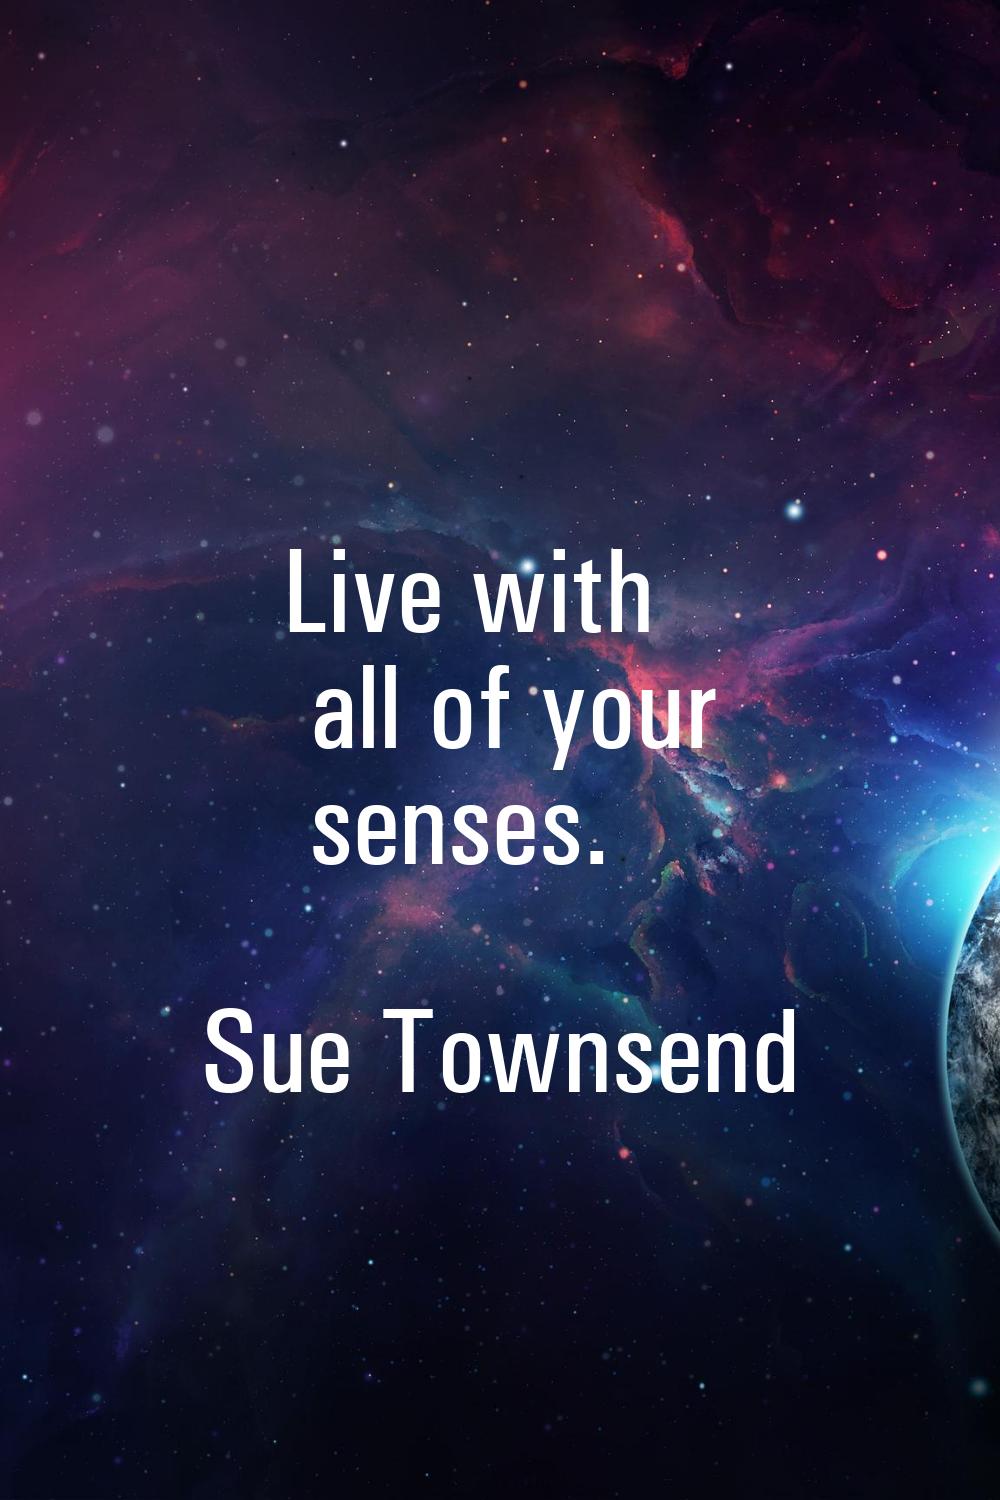 Live with all of your senses.